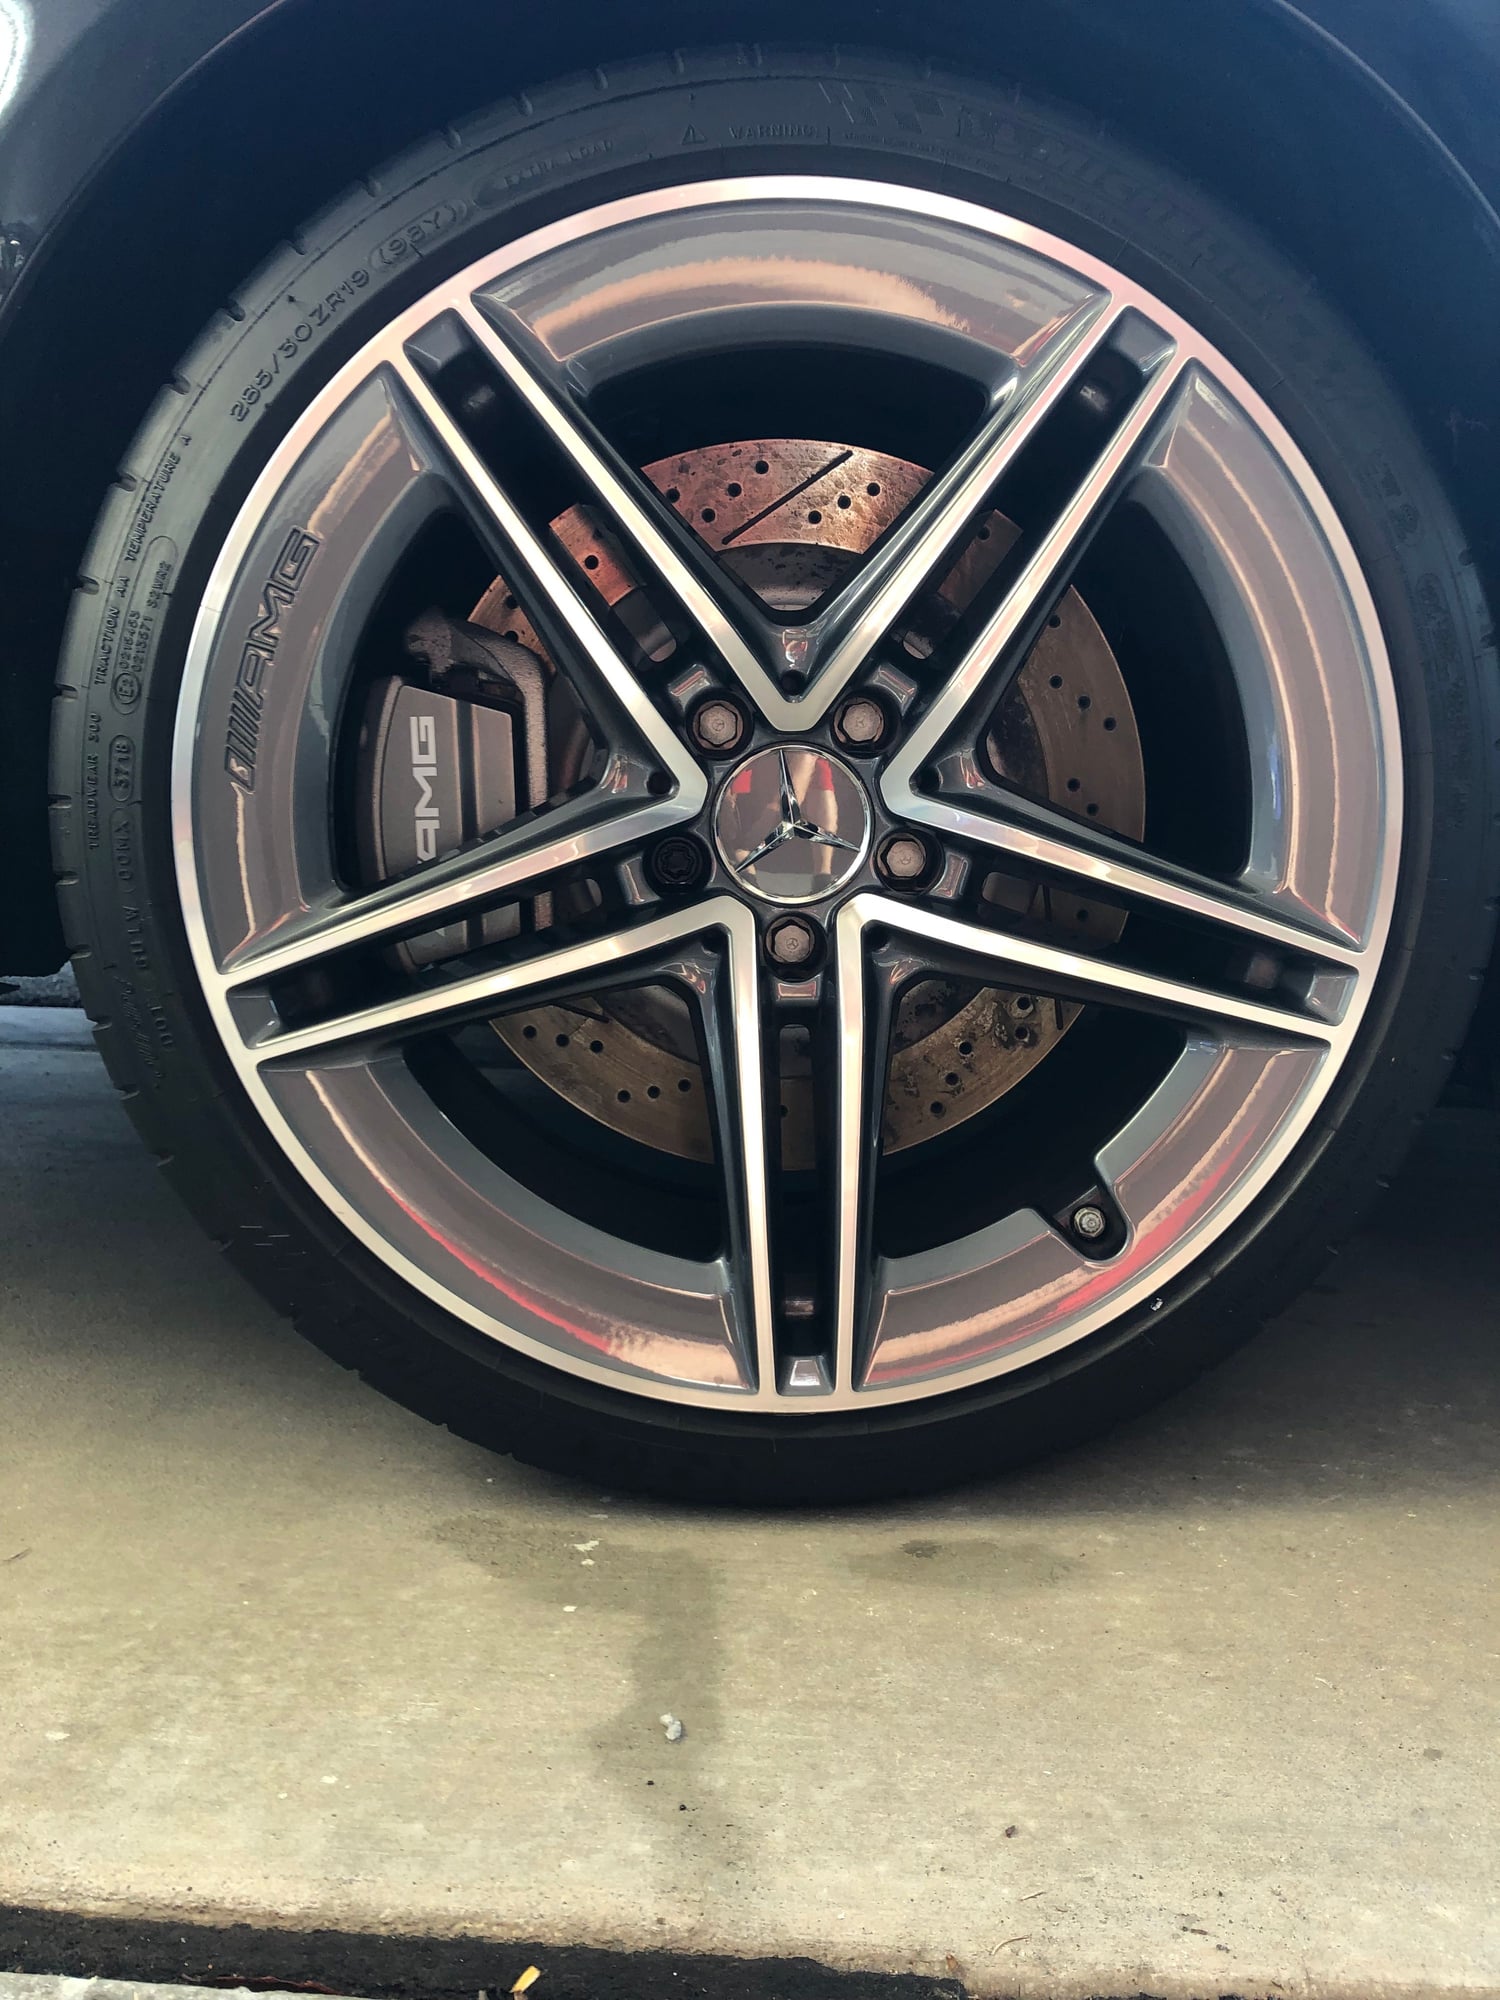 Wheels and Tires/Axles - 2019 C63 amg Coupe wheels - Used - All Years Mercedes-Benz C63 AMG - Irvine, CA 92618, United States